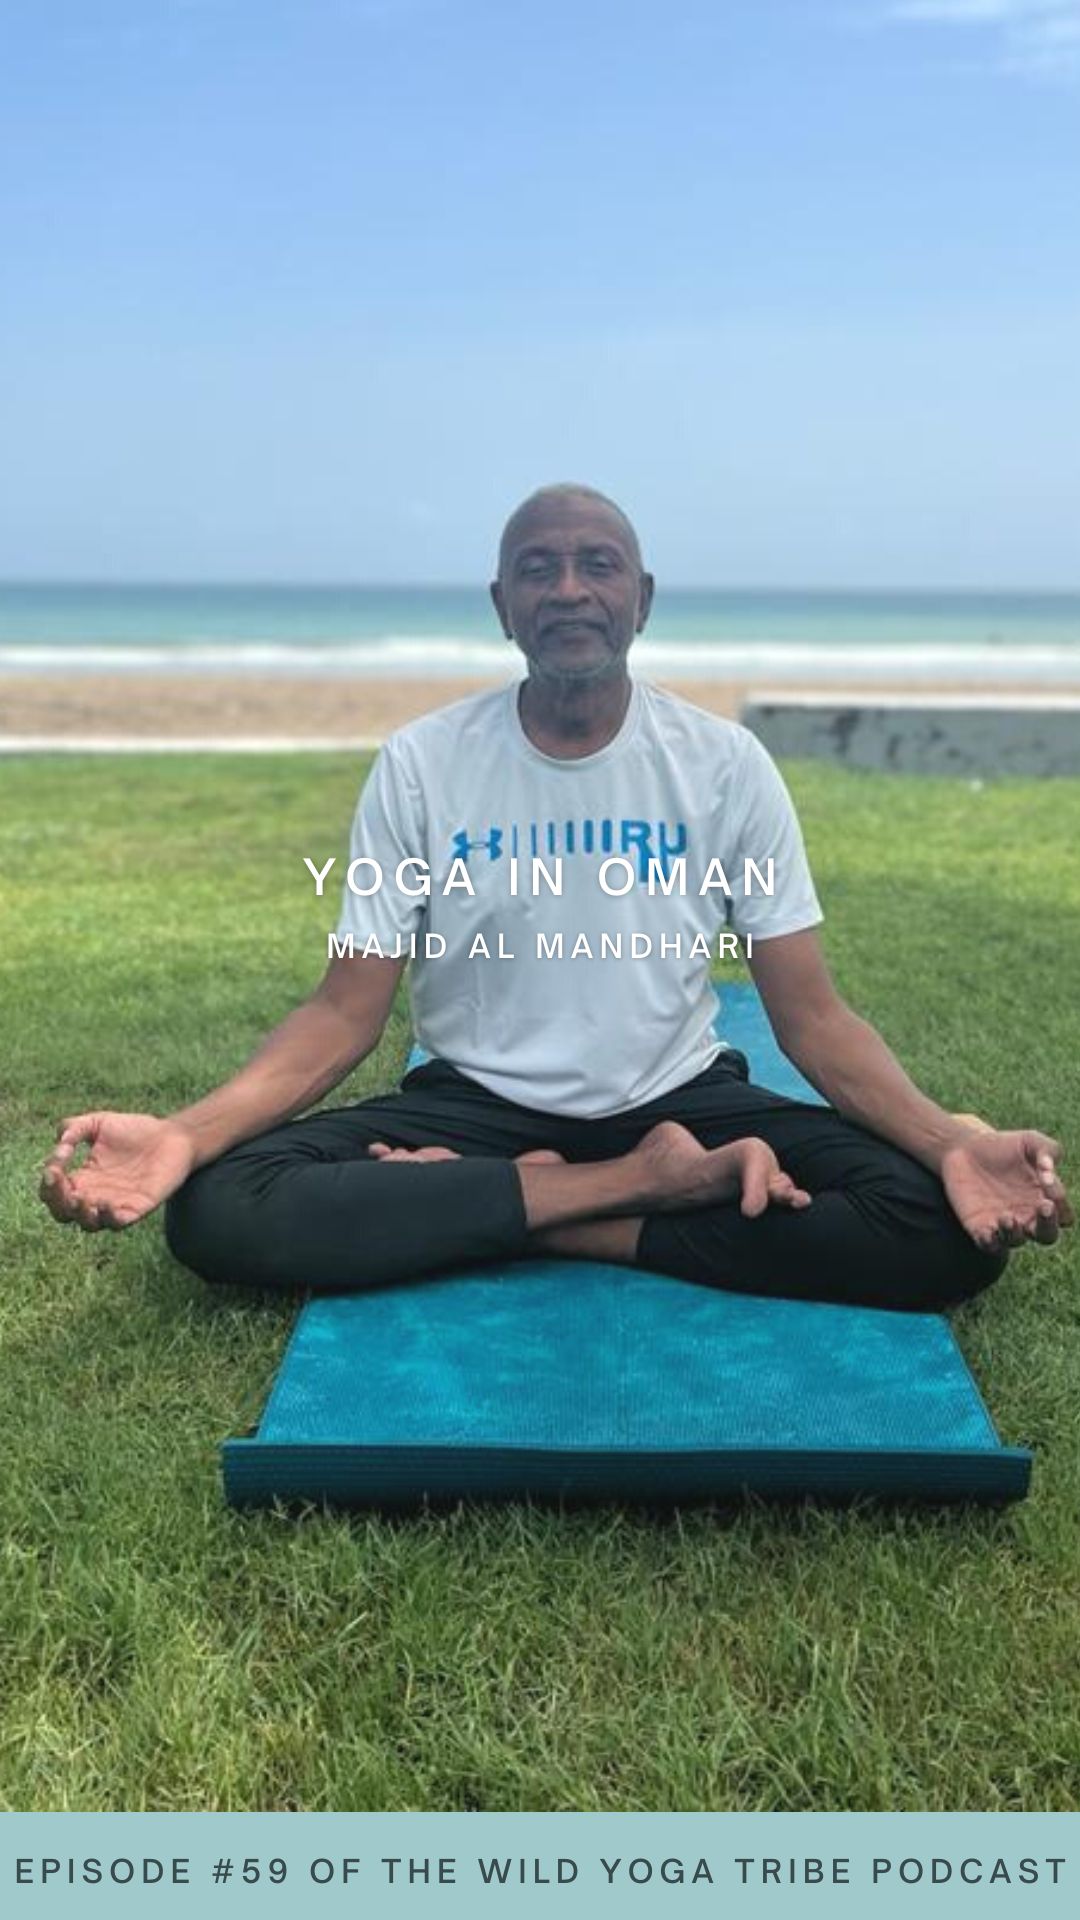 Meet Majid Al Mandhari, a yoga teacher from Oman who shares with us all about how to make meditation yours, and how meditation can be a cure for all ailments. Welcome to yoga in Oman!